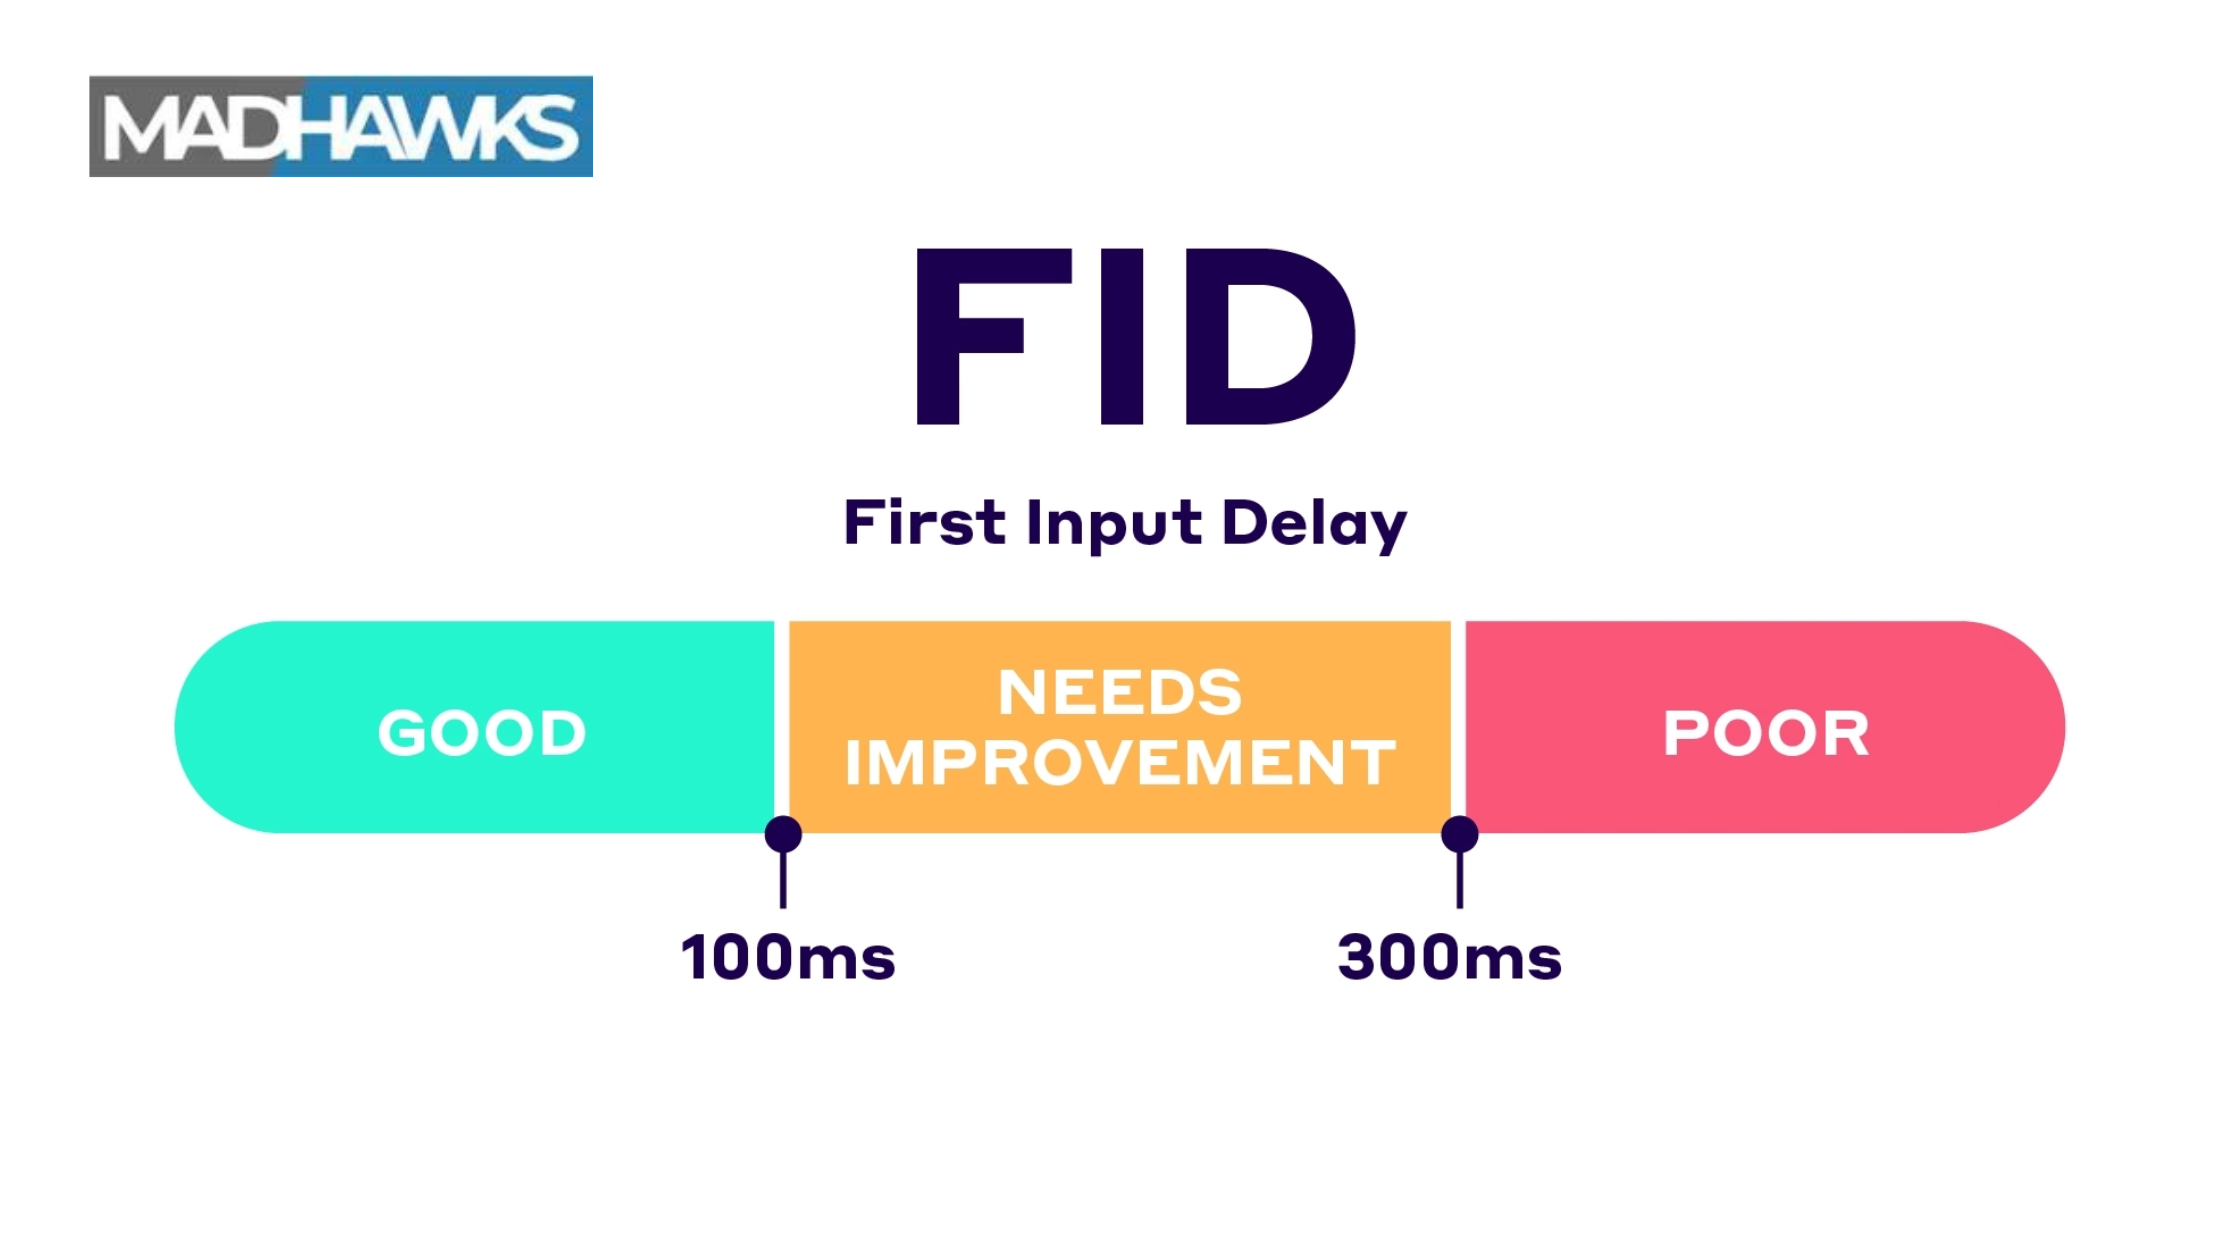 FID (First Input Delay)